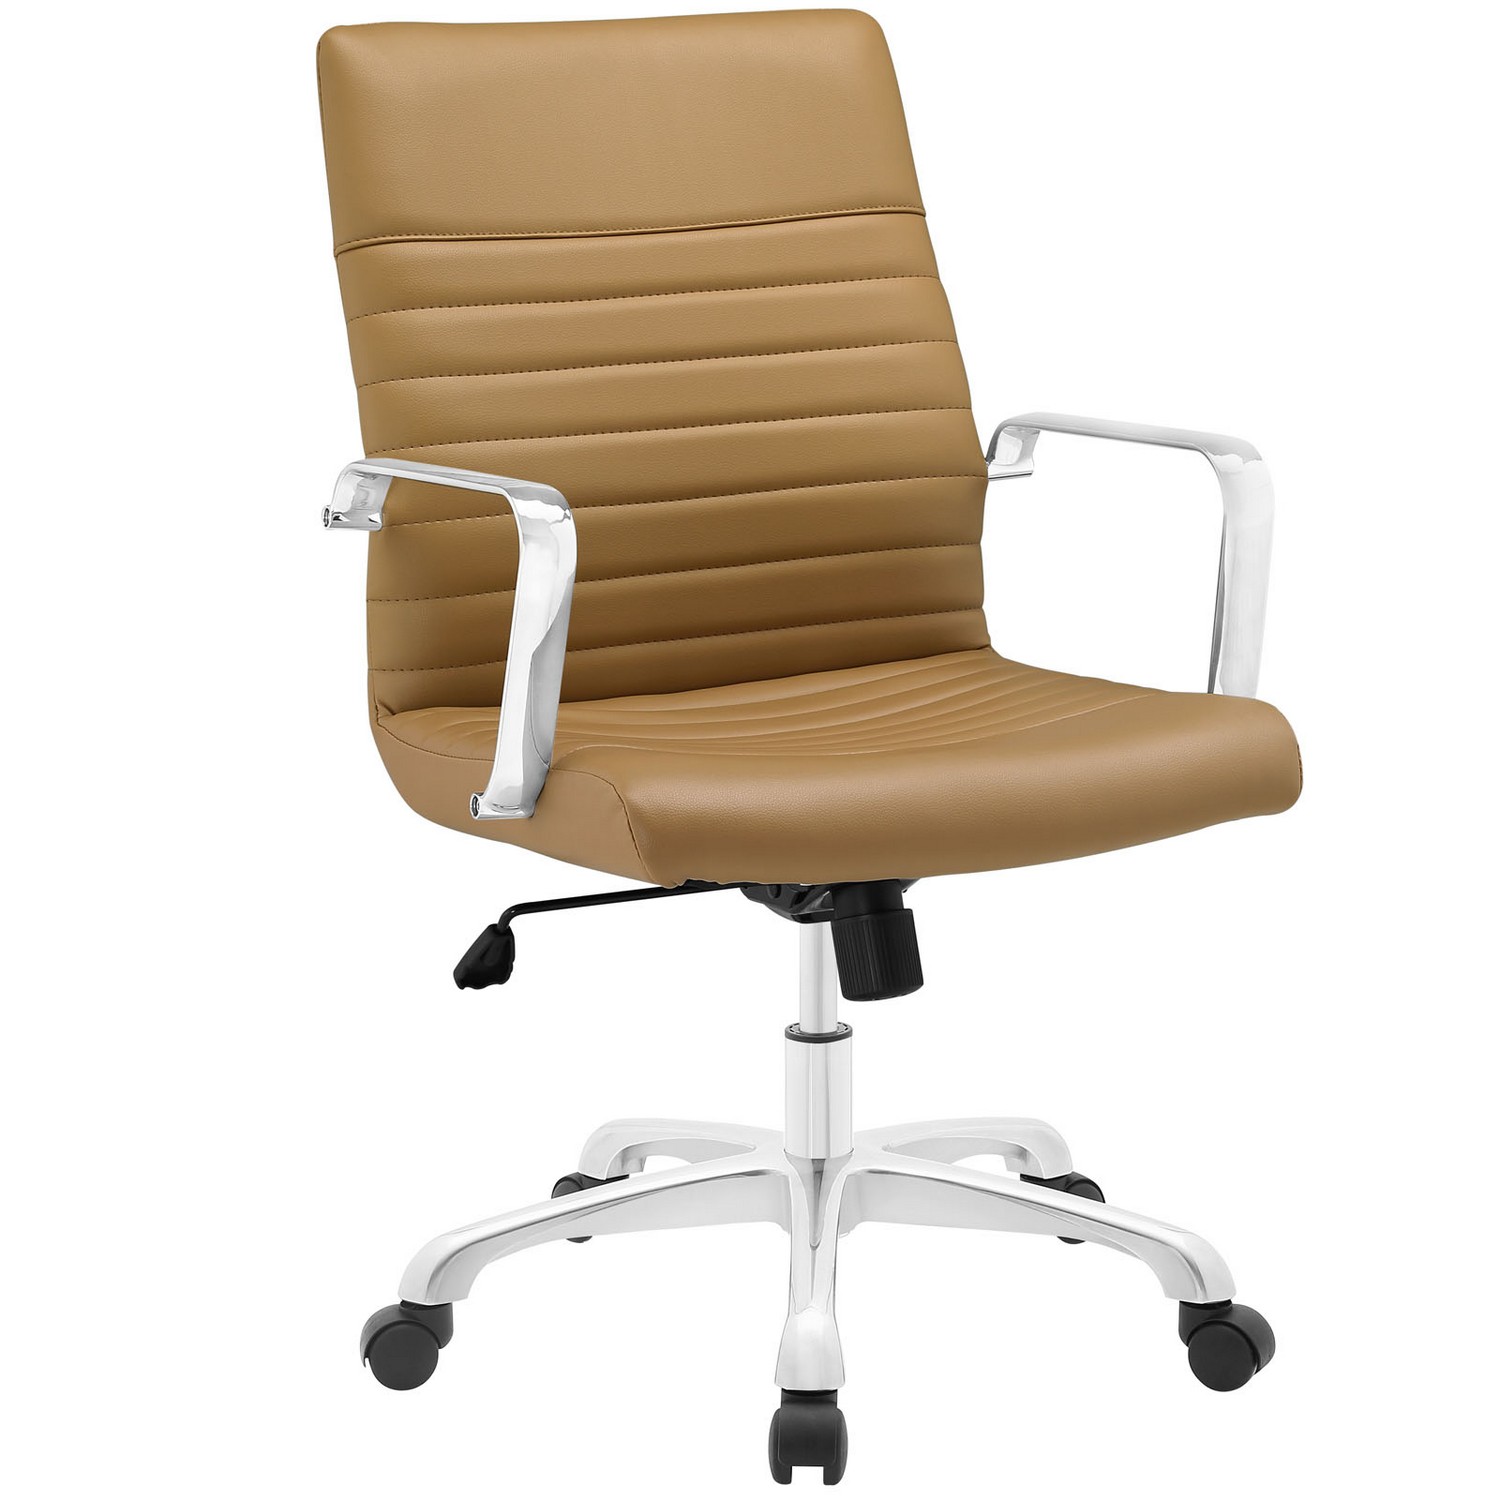 Modway Finesse Mid Back Office Chair - Tan